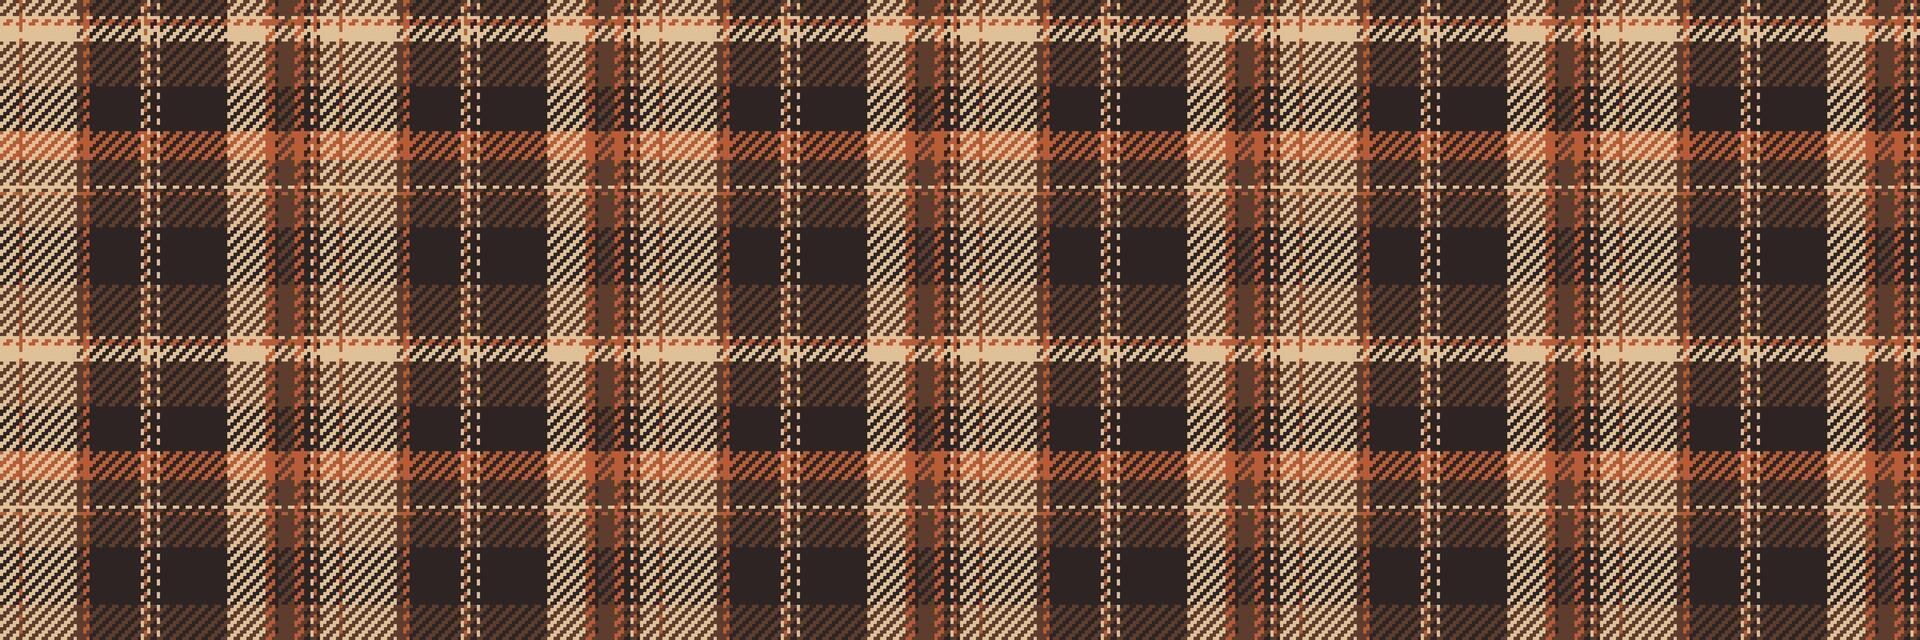 Scarf textile check seamless, buffalo tartan pattern. Design fabric plaid background texture in orange and dark colors. vector